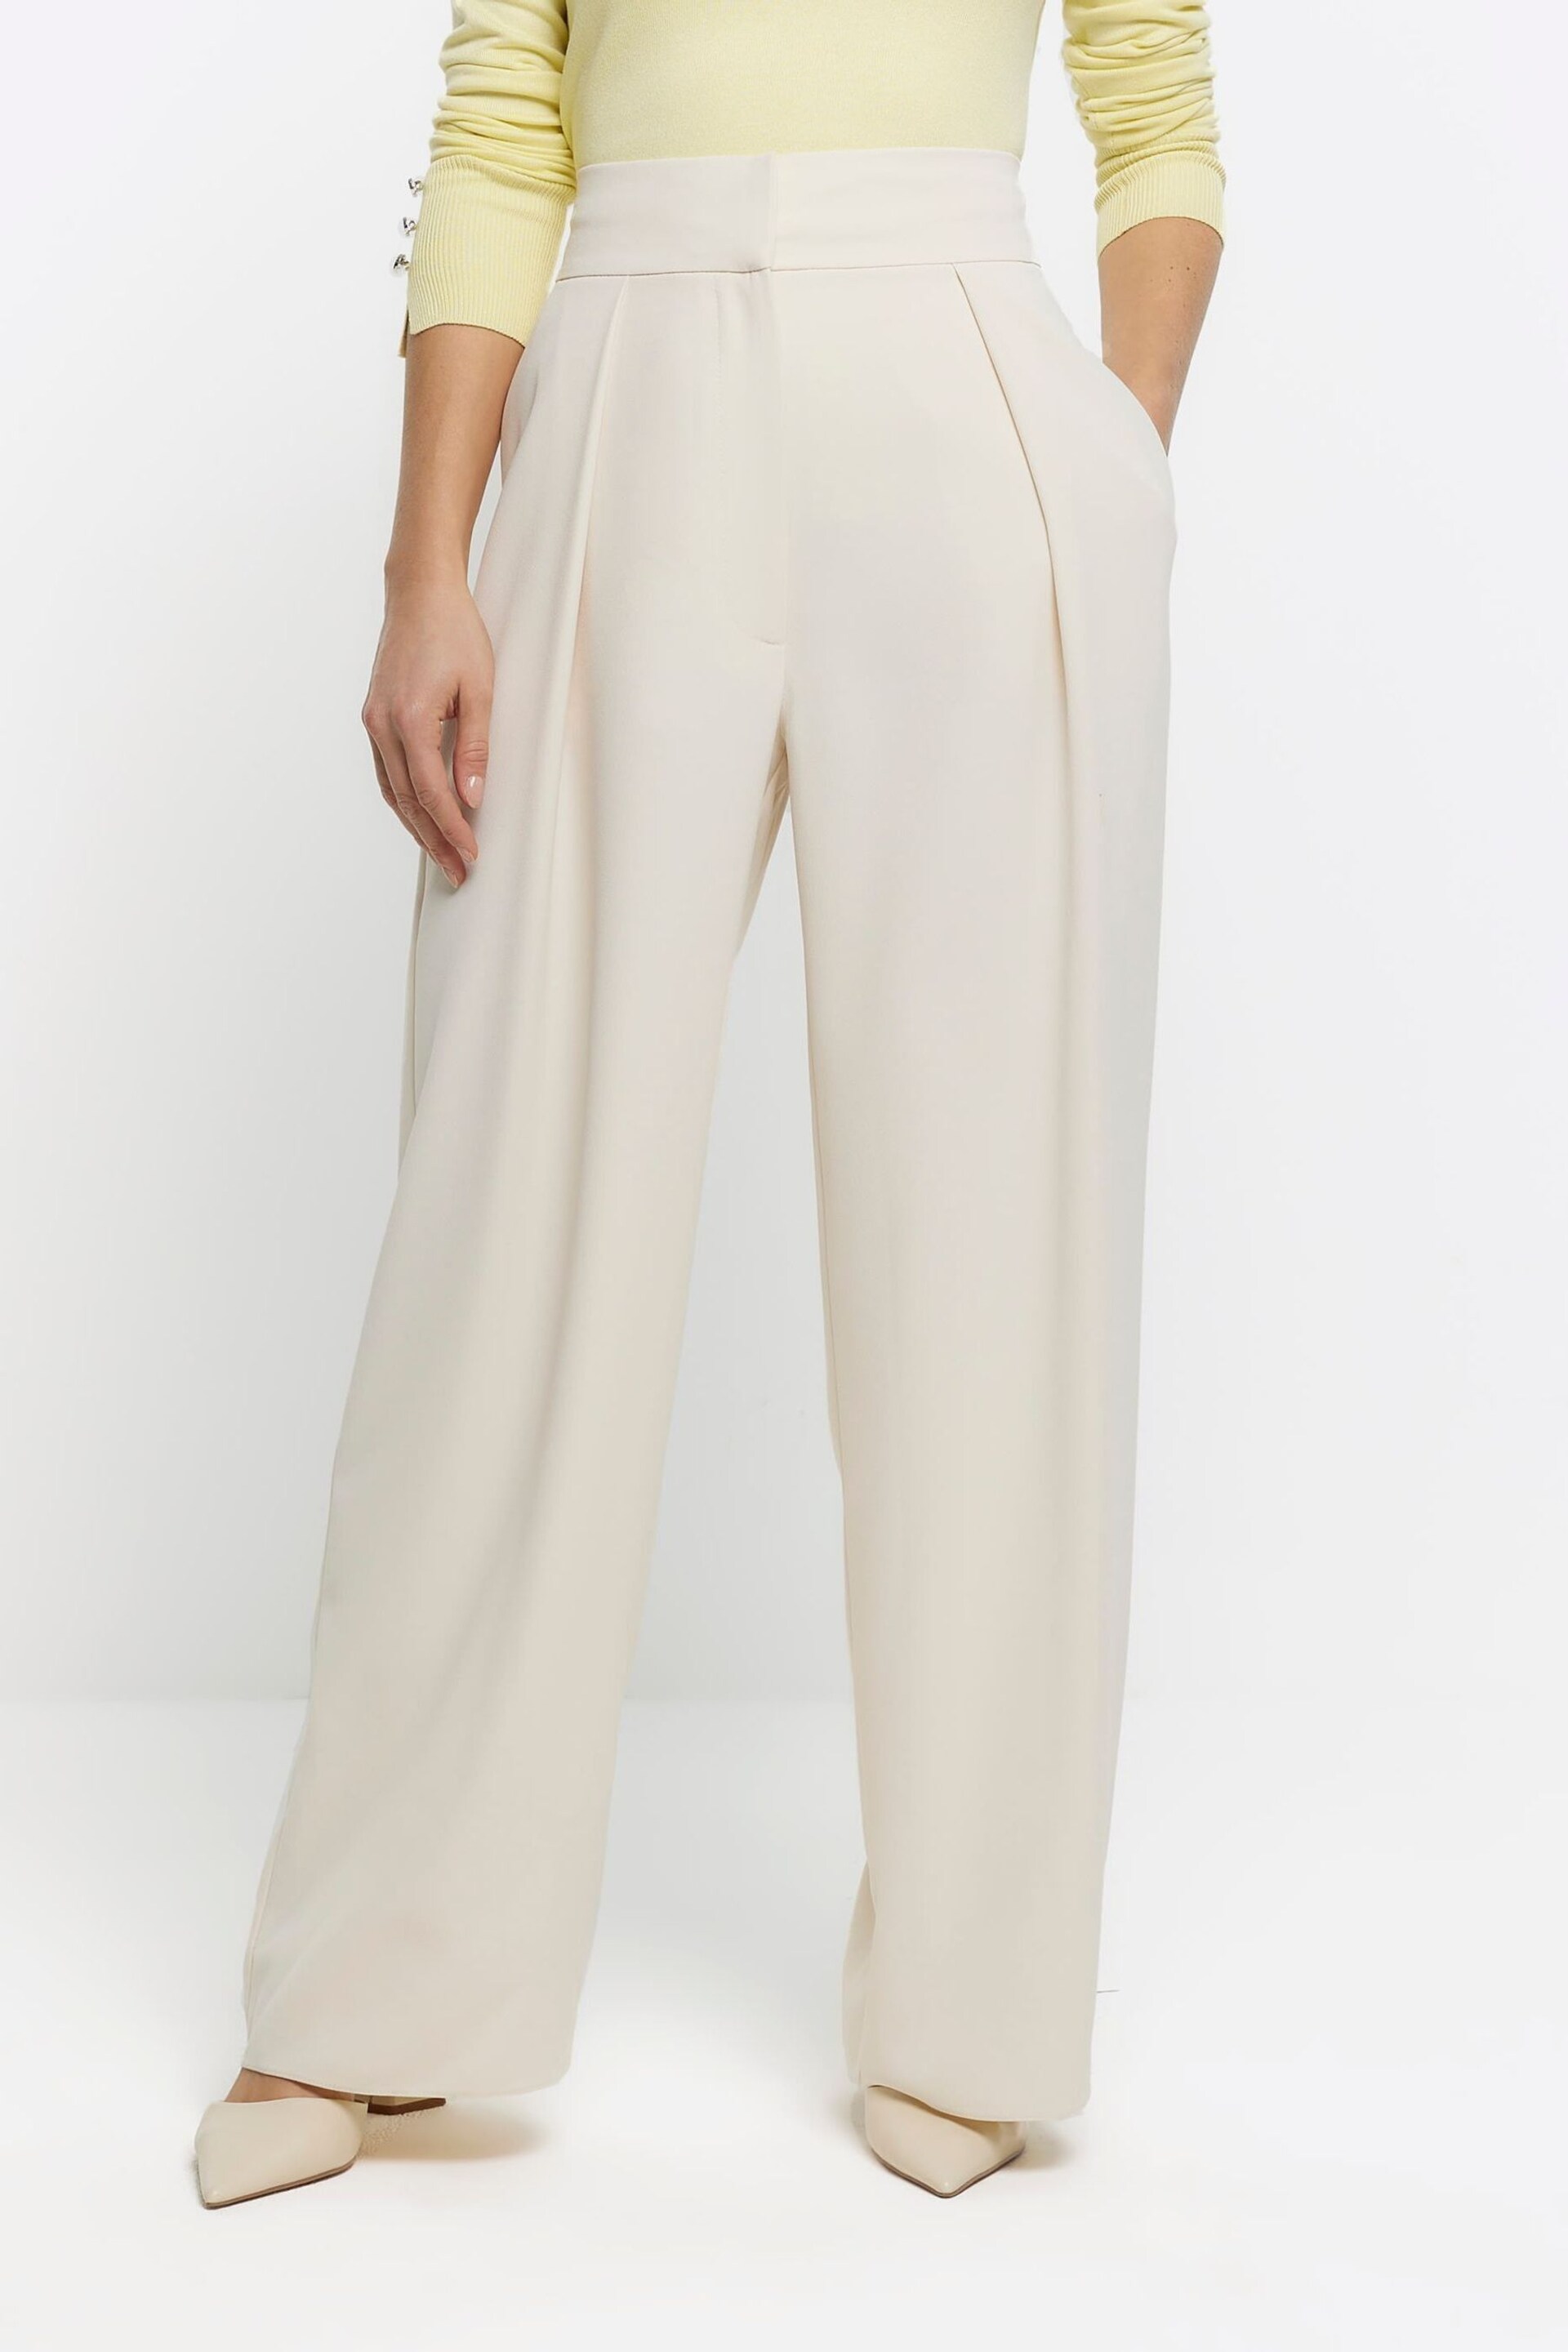 River Island Cream Wide Leg Pleated Clean Trousers - Image 1 of 6